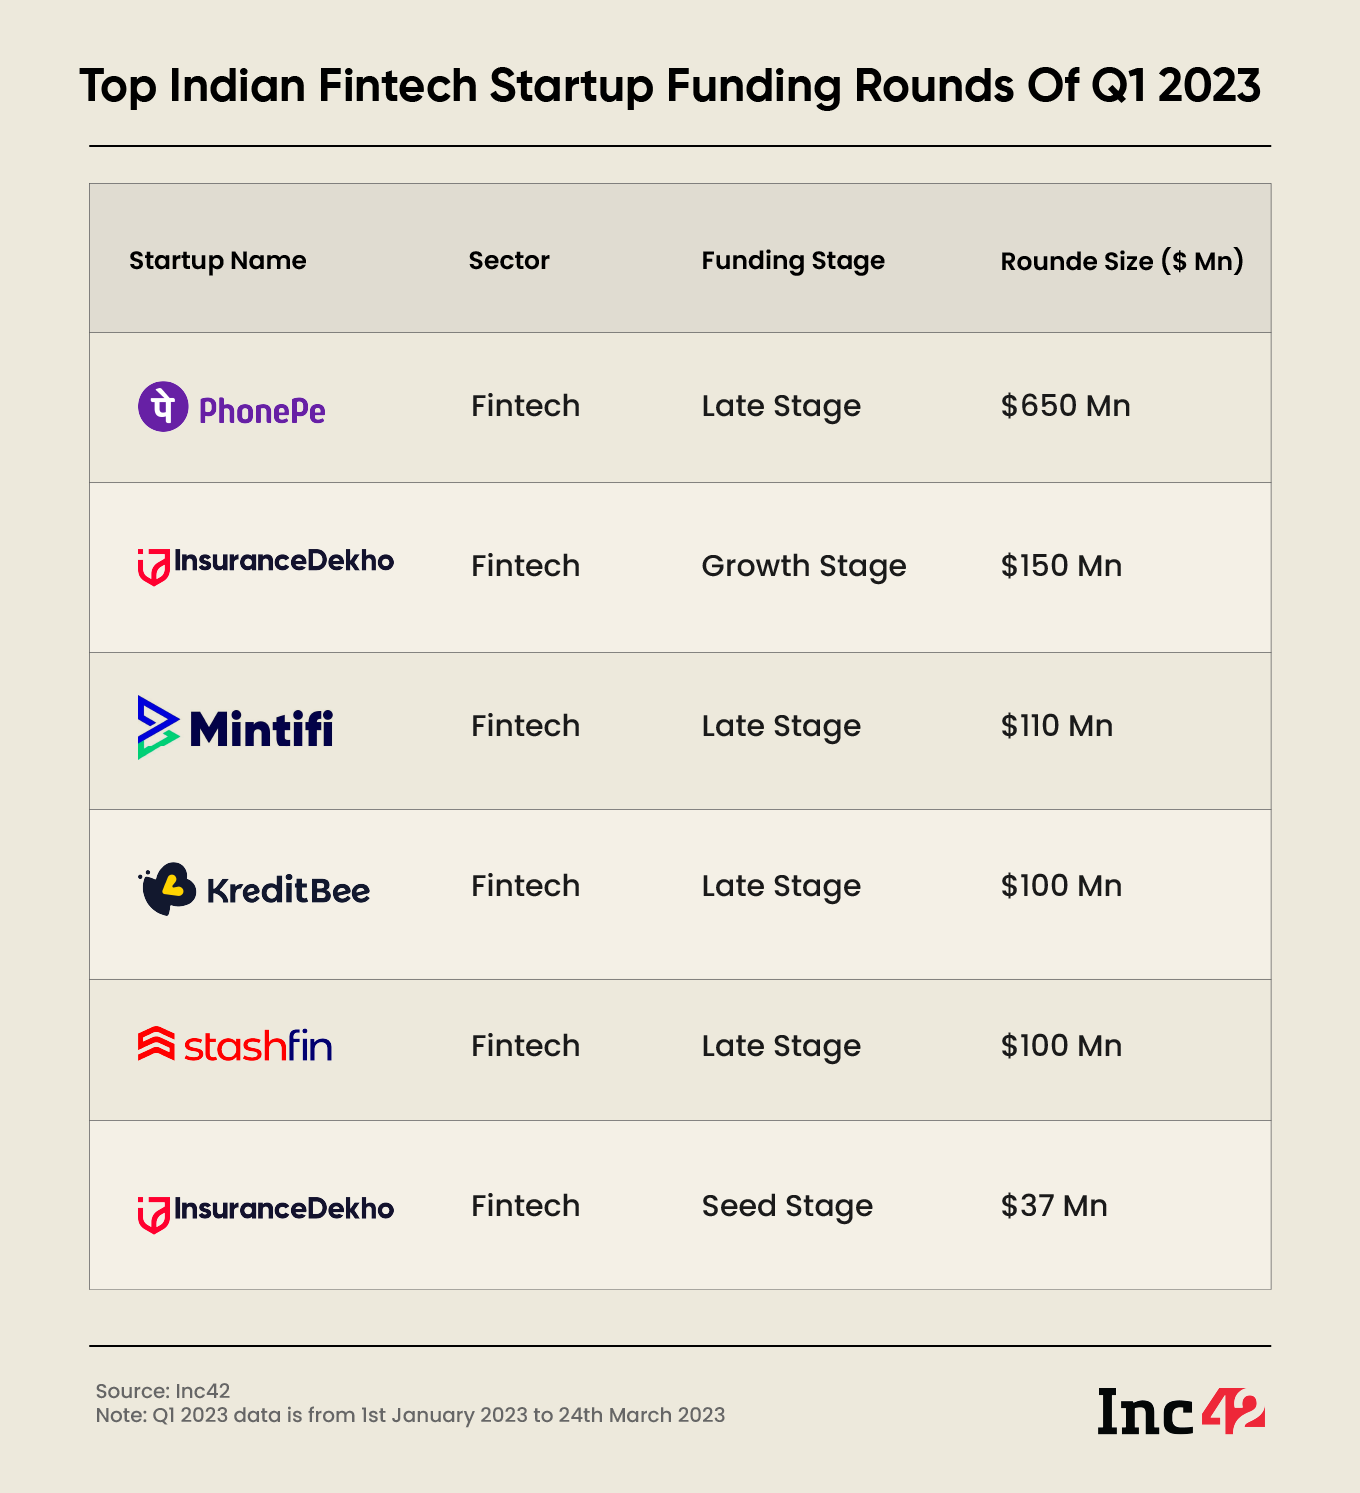 Top Indian Fintech Startup Funding Rounds Of Q1 2023